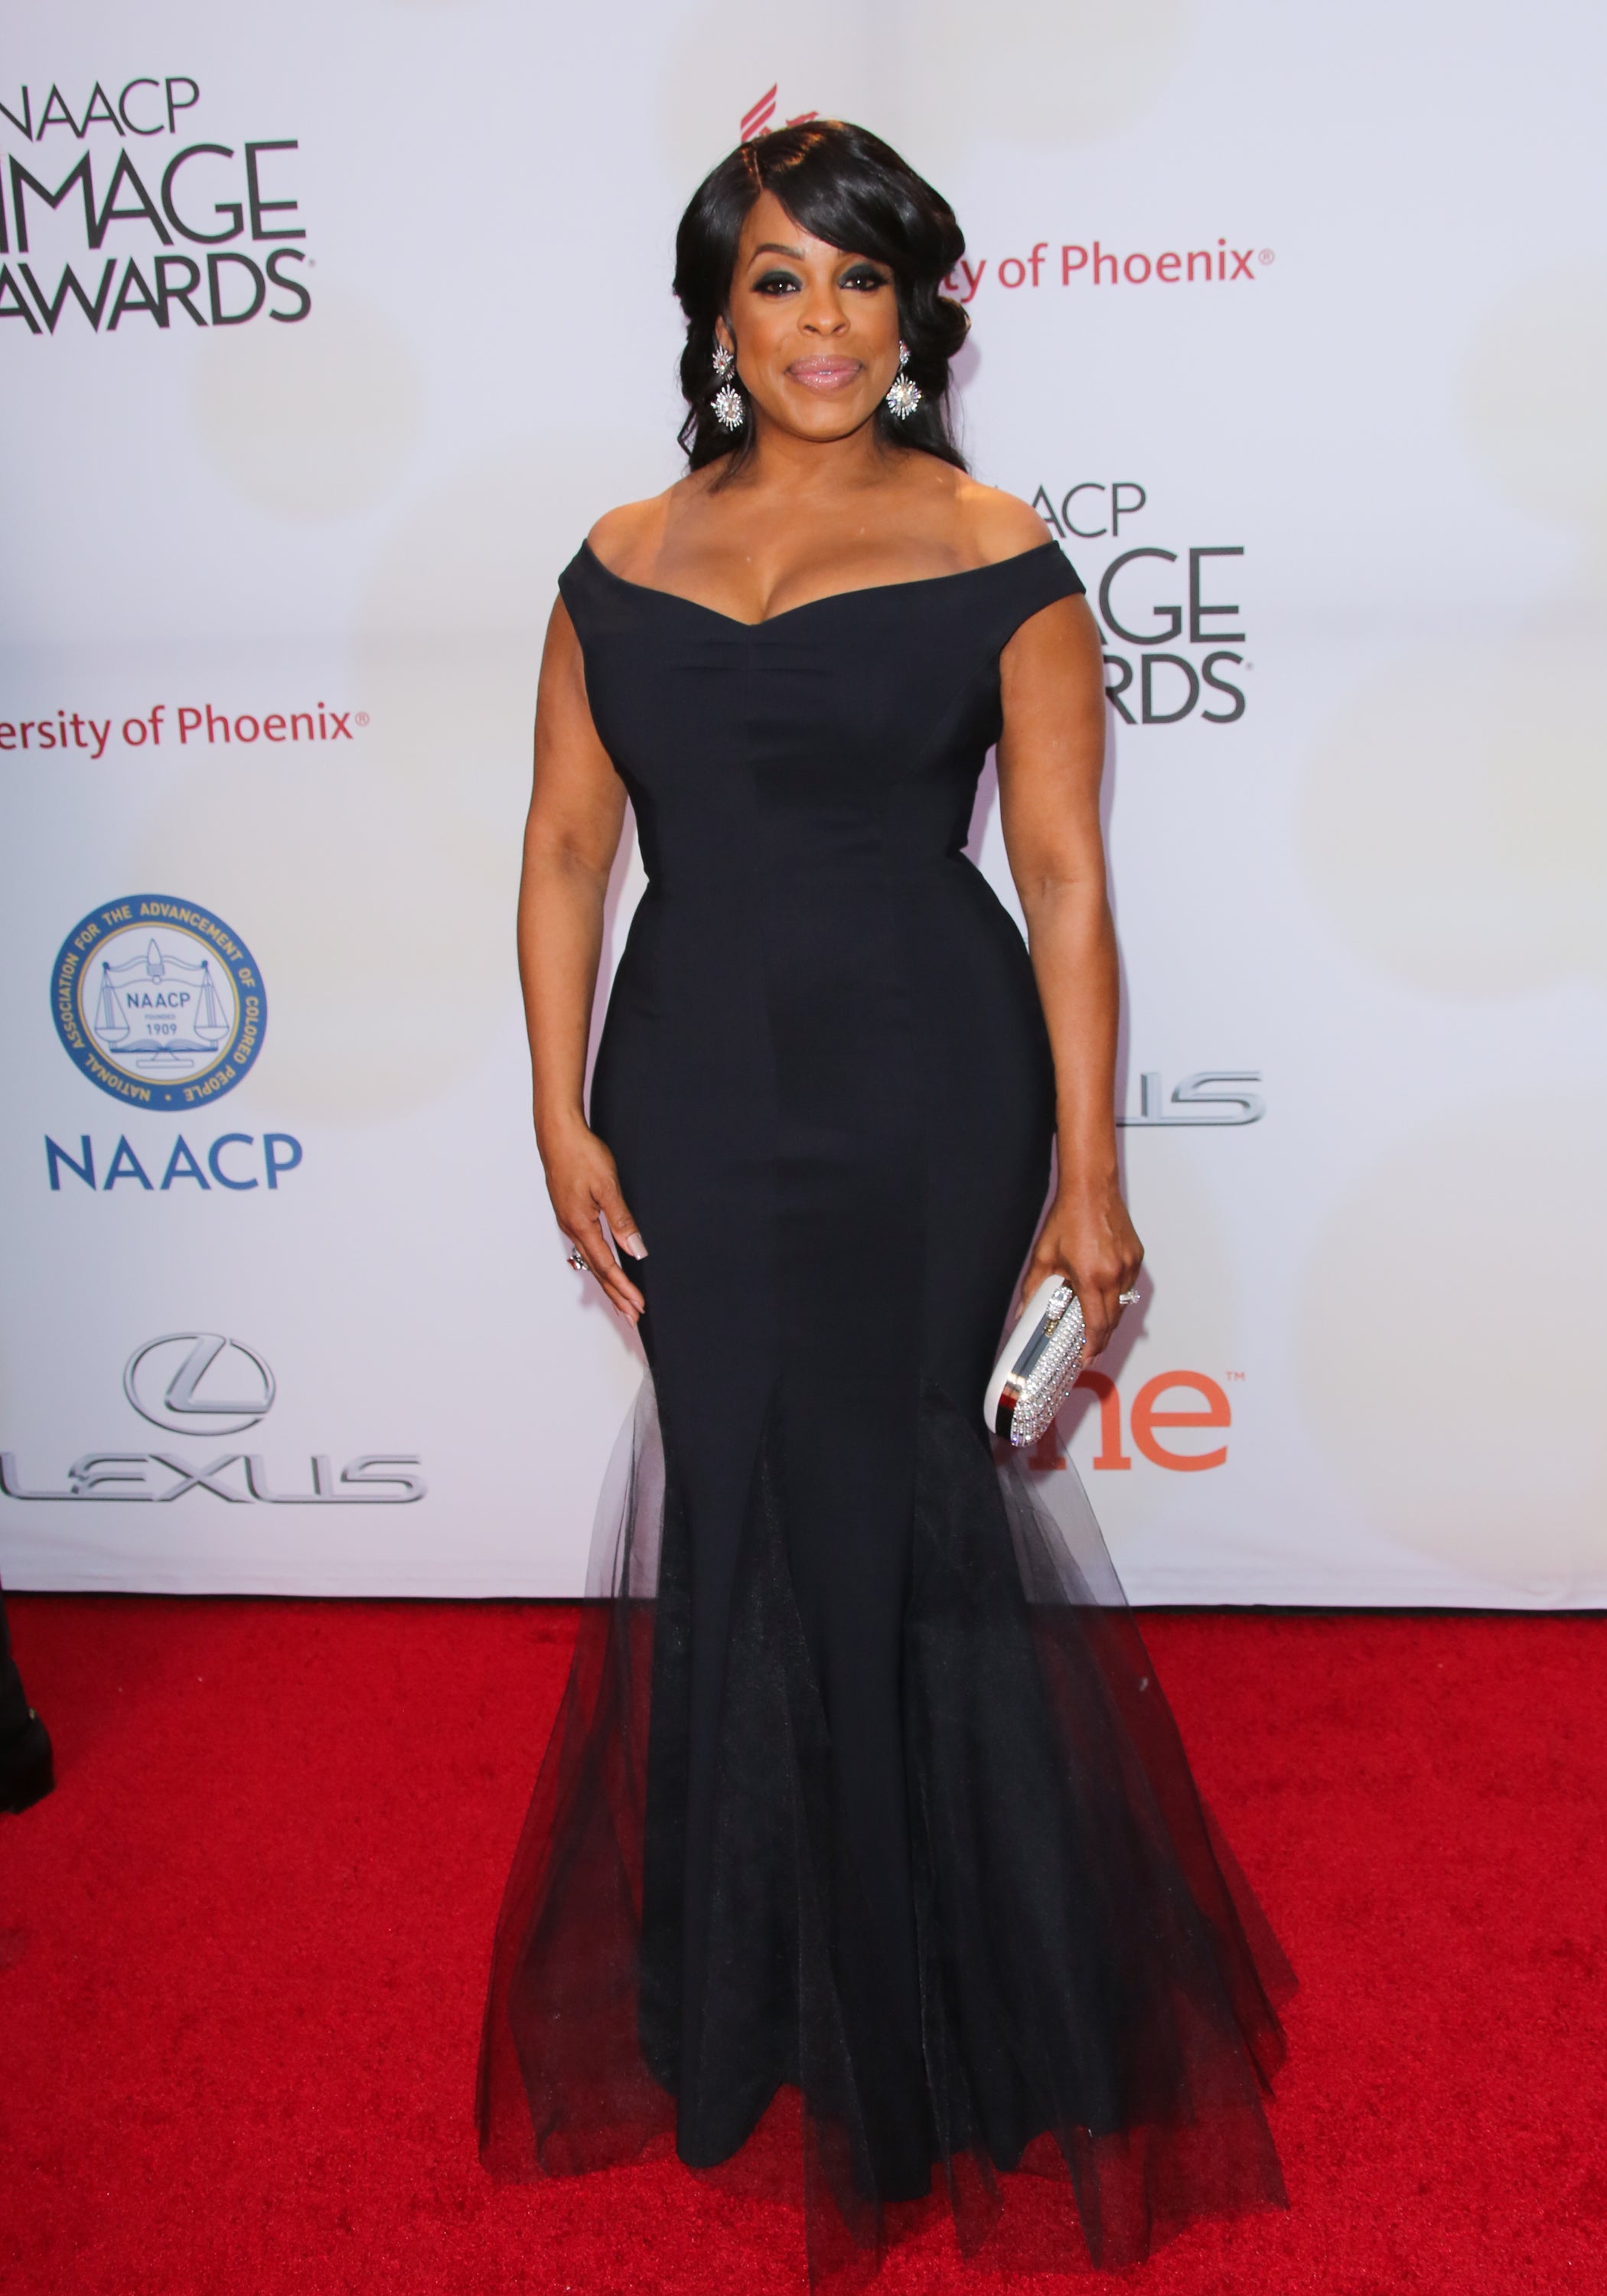 Niecy nash comes out and announces marriage to jessica betts! 